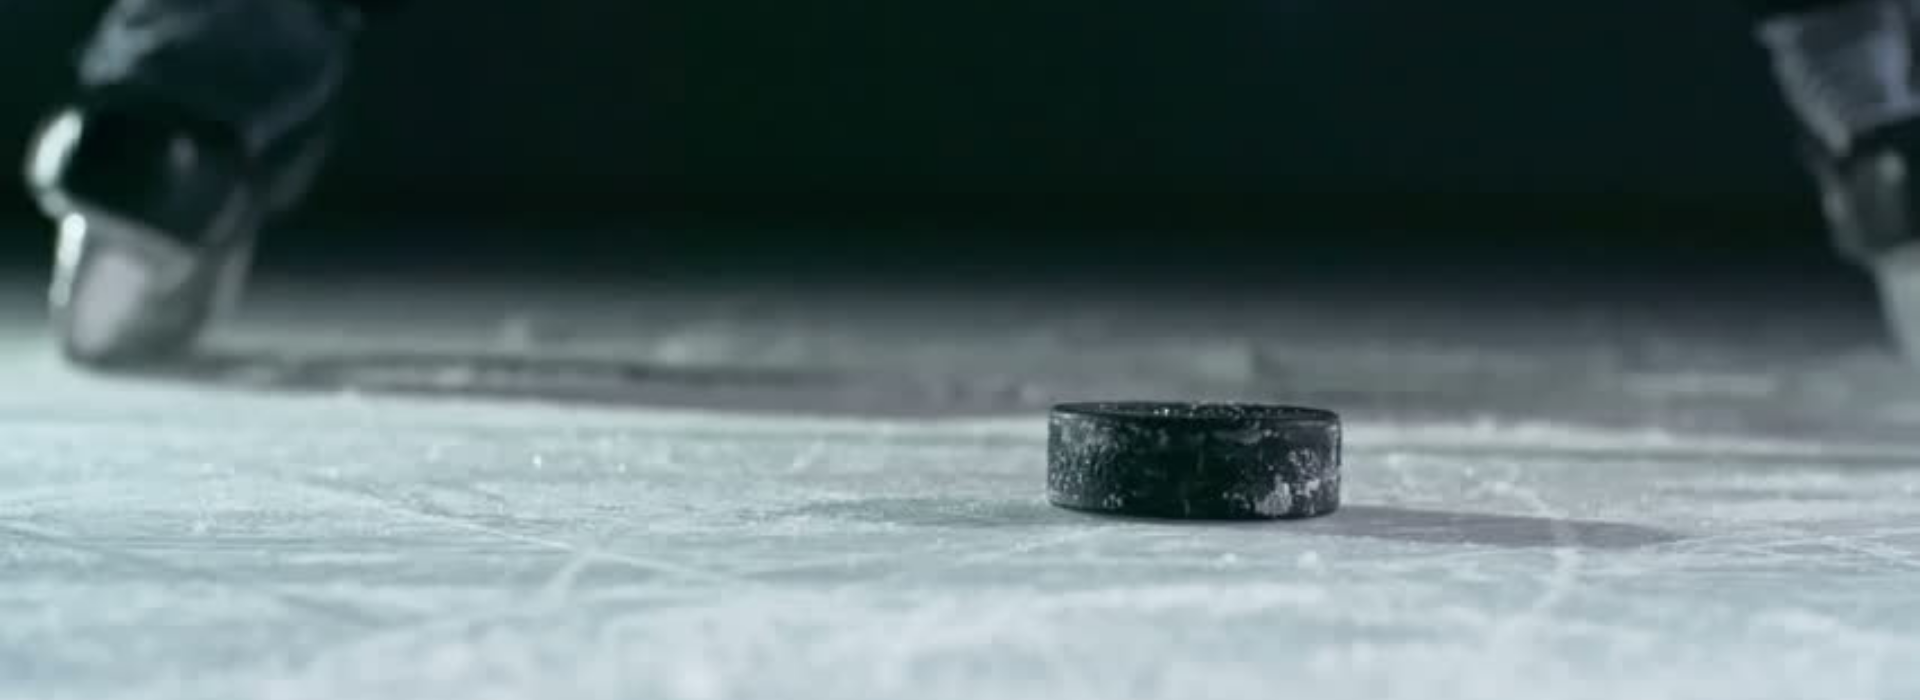 puck on ice